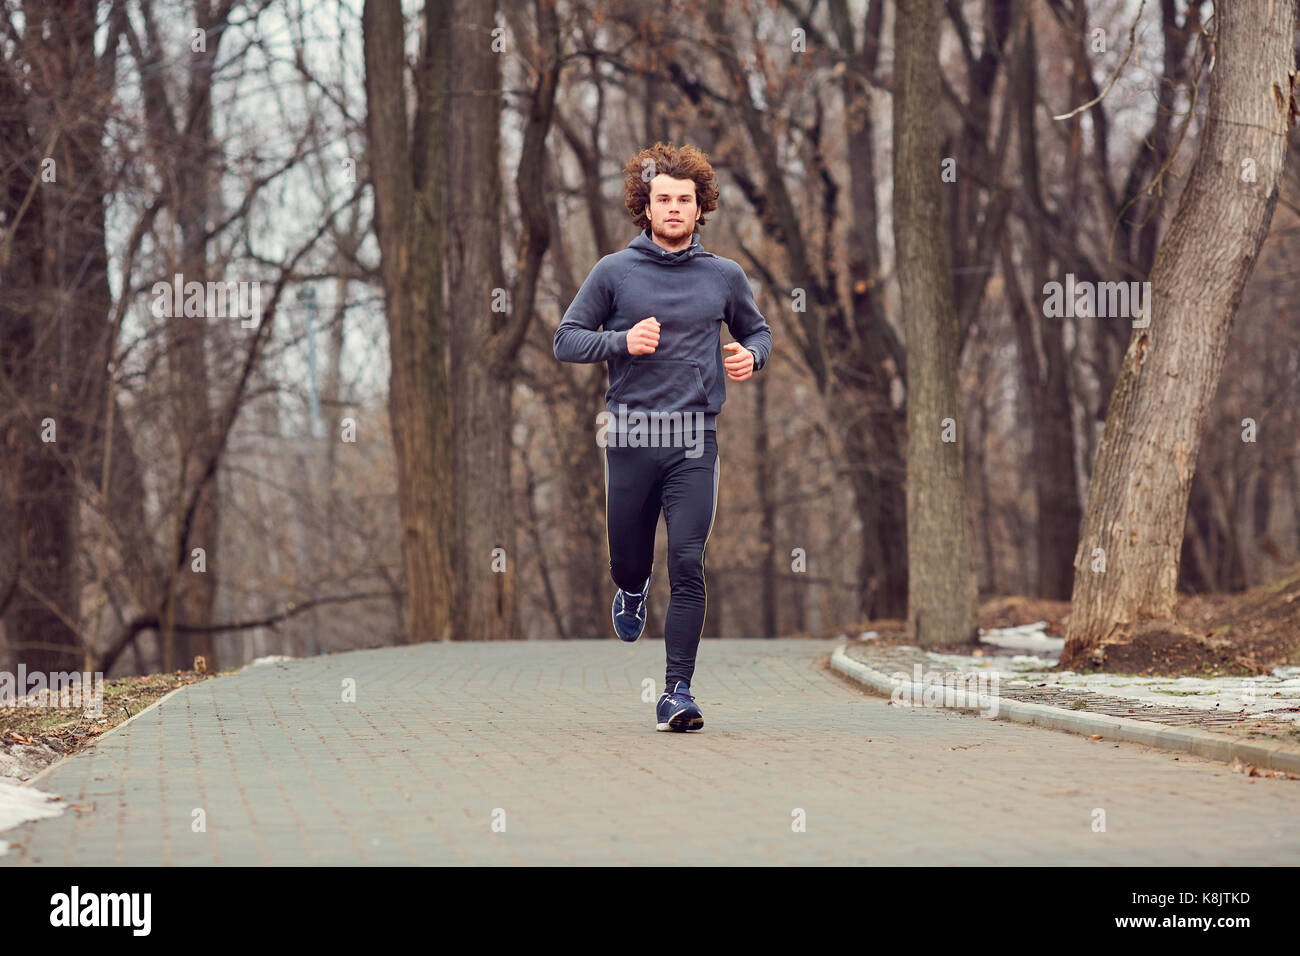 A young male runner runs in the park. Stock Photo